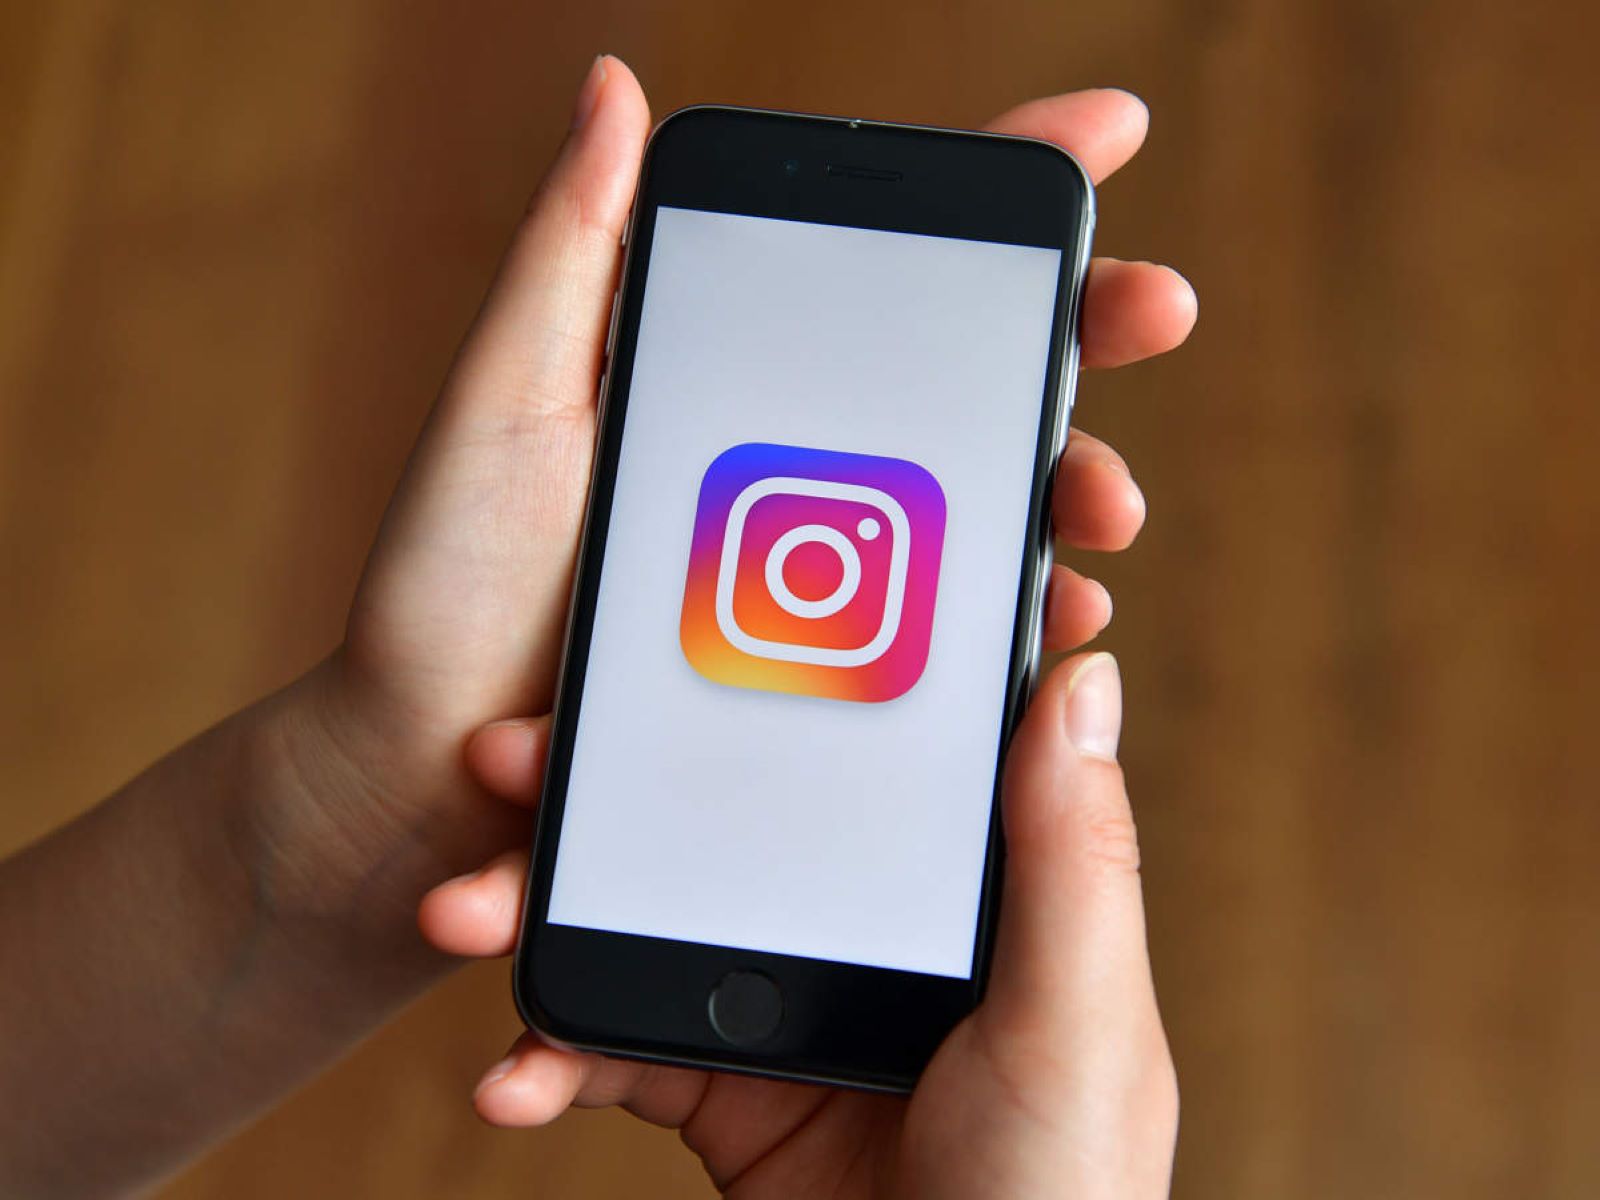 How To Unblock And Send A Request To Someone On Instagram